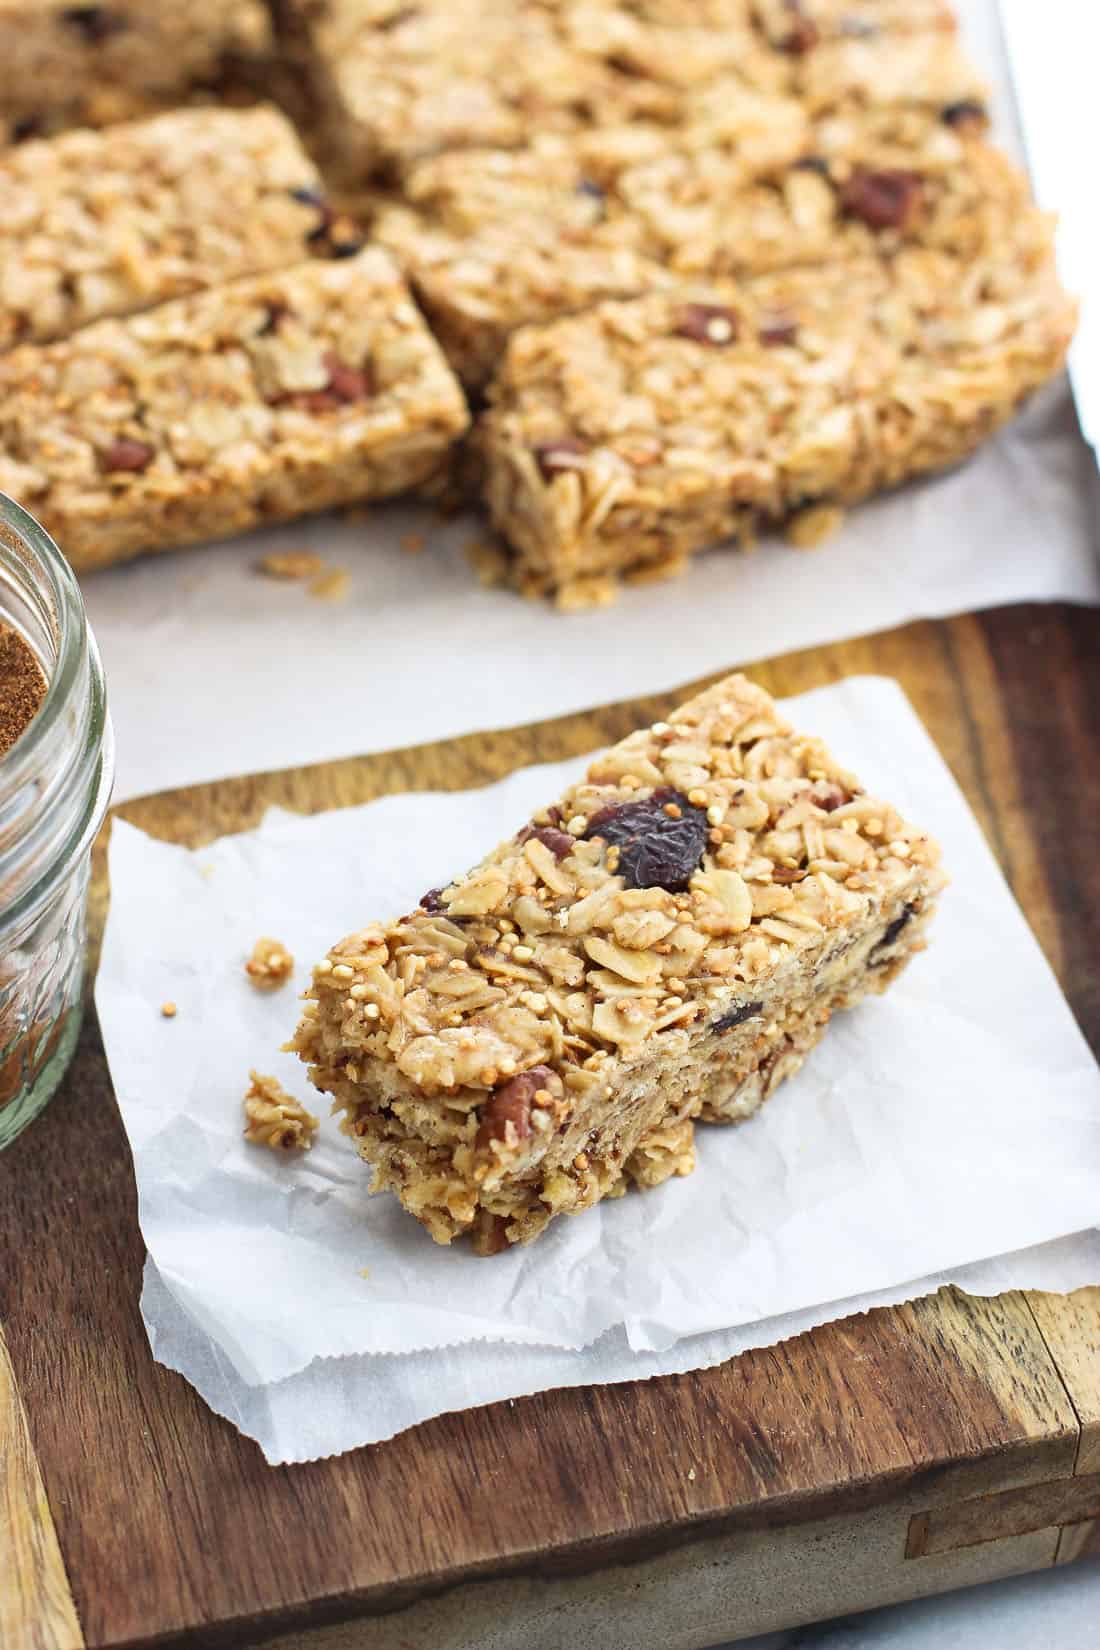 A close-up of a granola bar with a few bites taken out of it resting on a small piece of parchment paper with the rest of the bars in the background